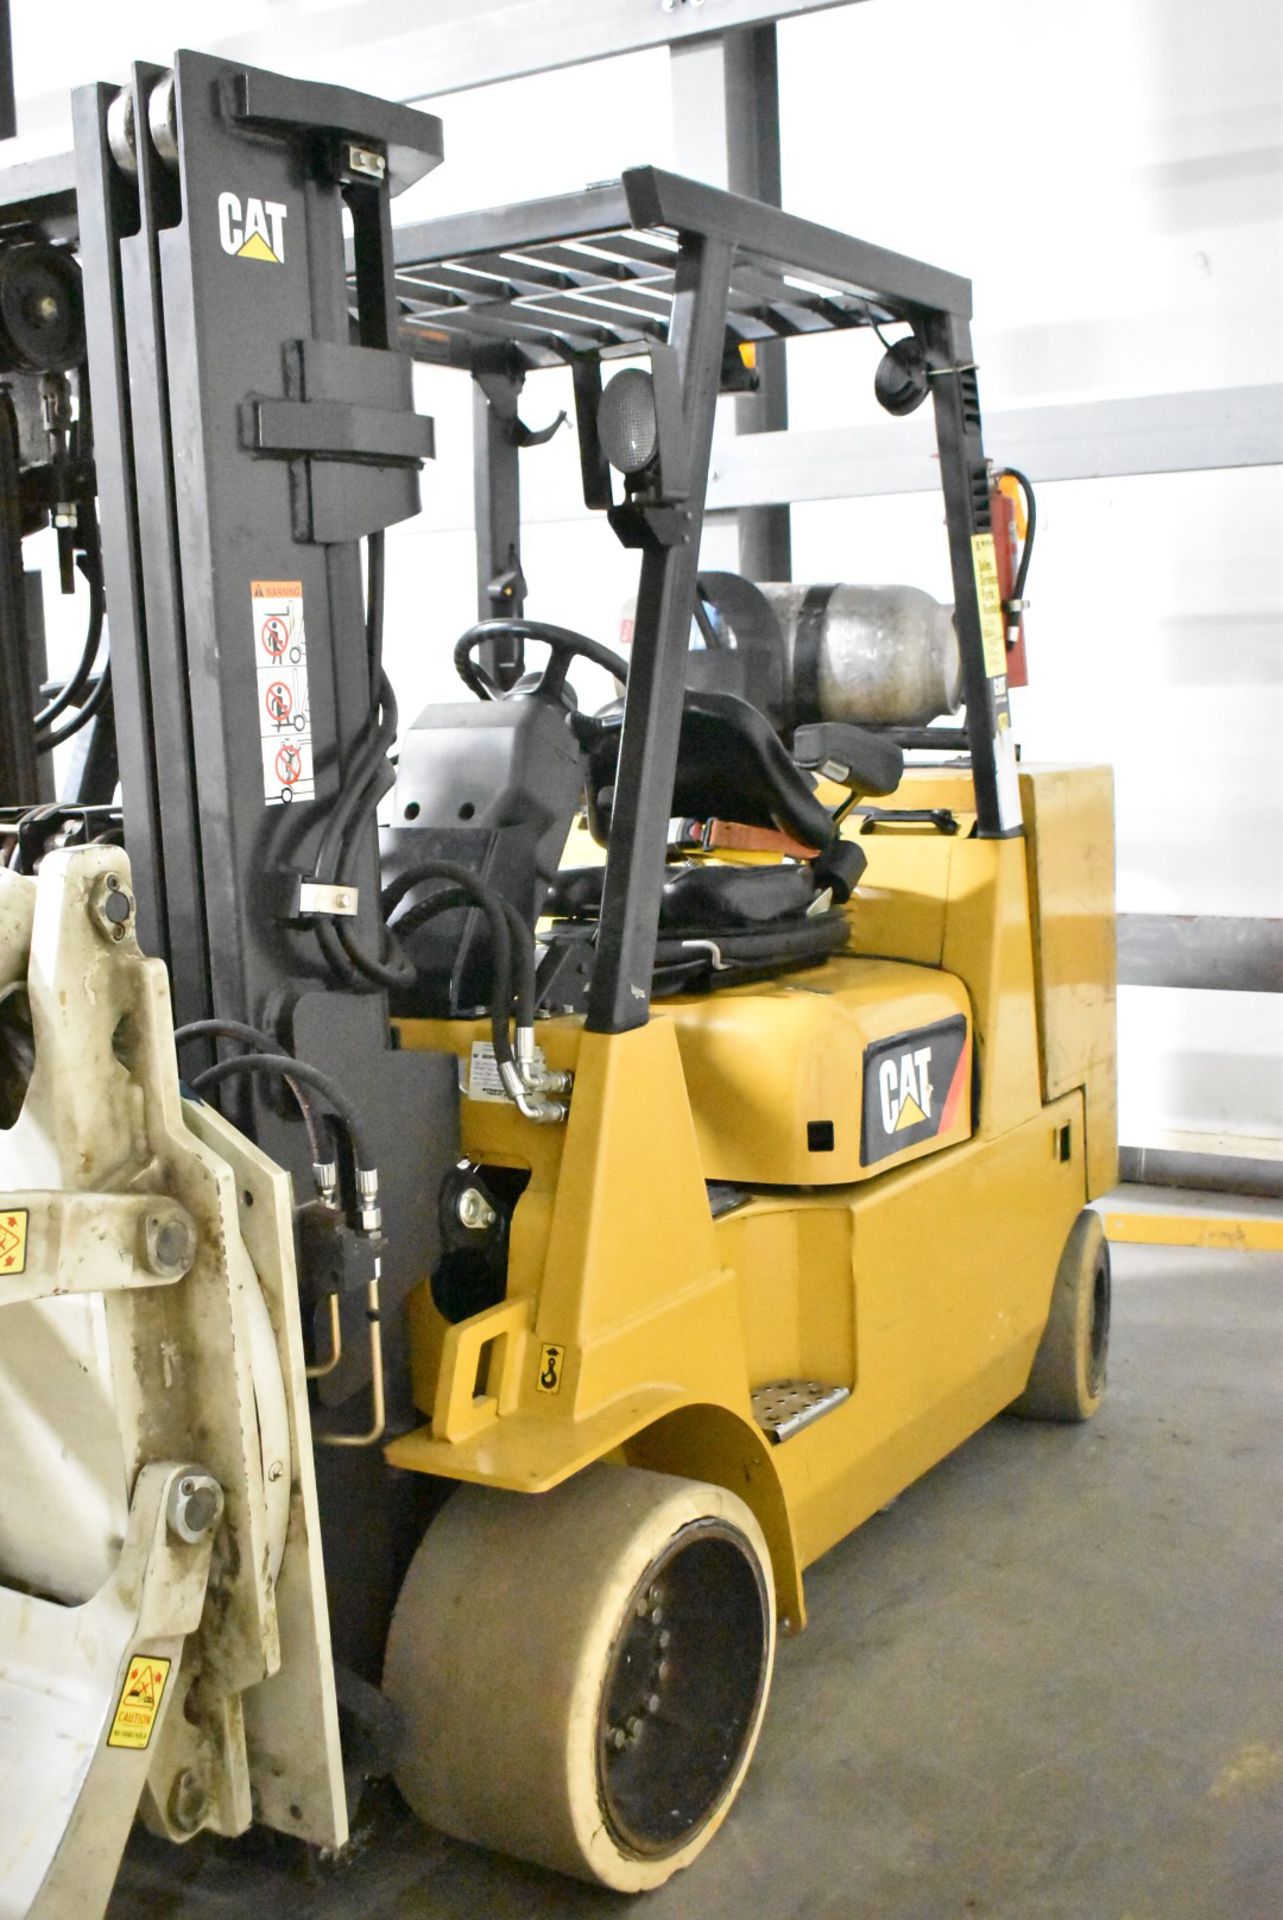 CATERPILLAR (2013) GC55KPRSTR 7,000 LBS. CAPACITY LPG FORKLIFT WITH 172" MAX VERTICAL REACH, 3-STAGE - Image 3 of 10